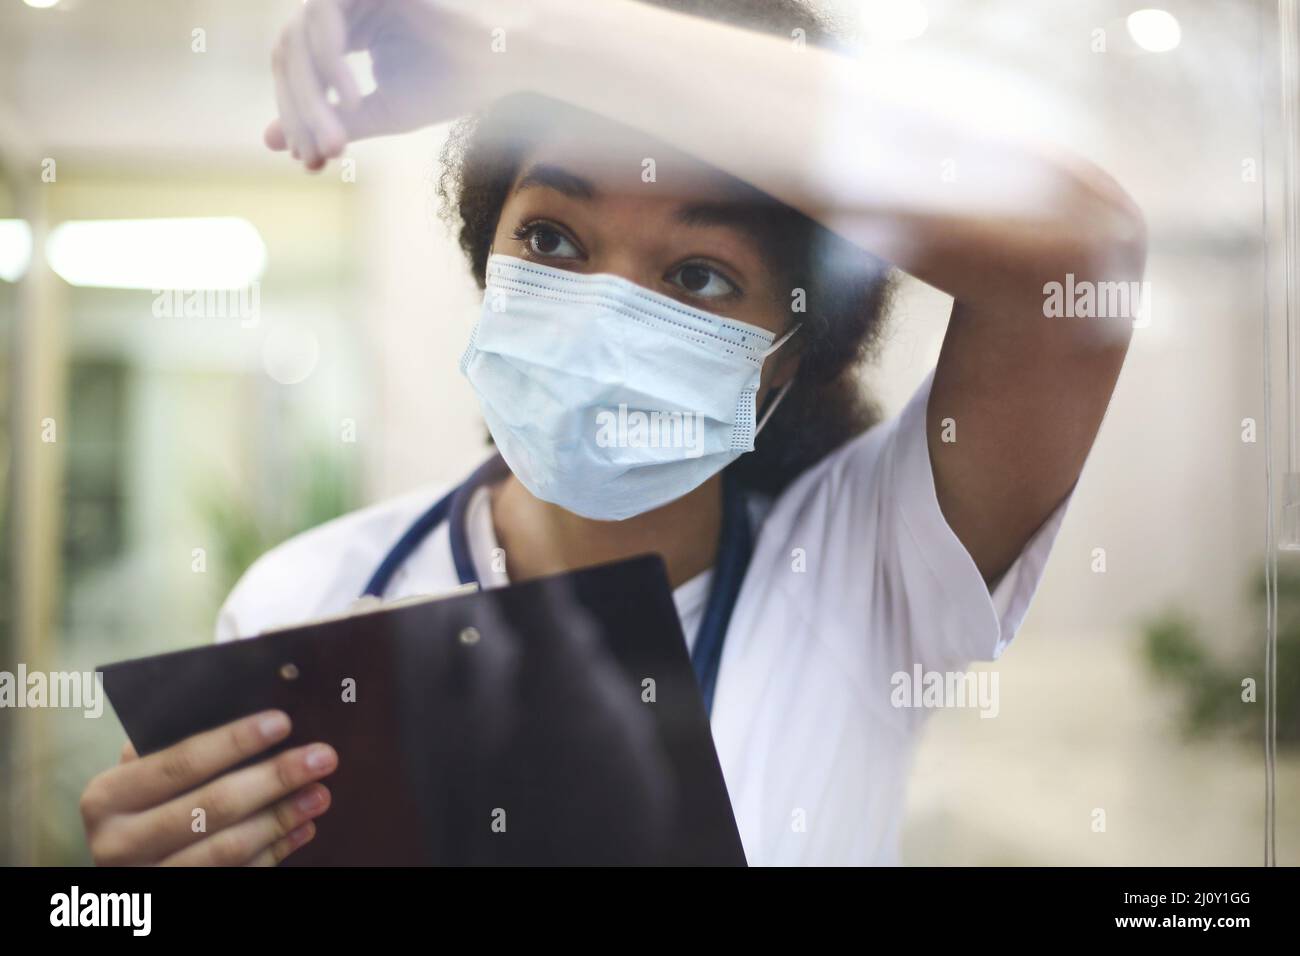 Young tired overworked african american medical worker in protective face mask looking out of window Stock Photo